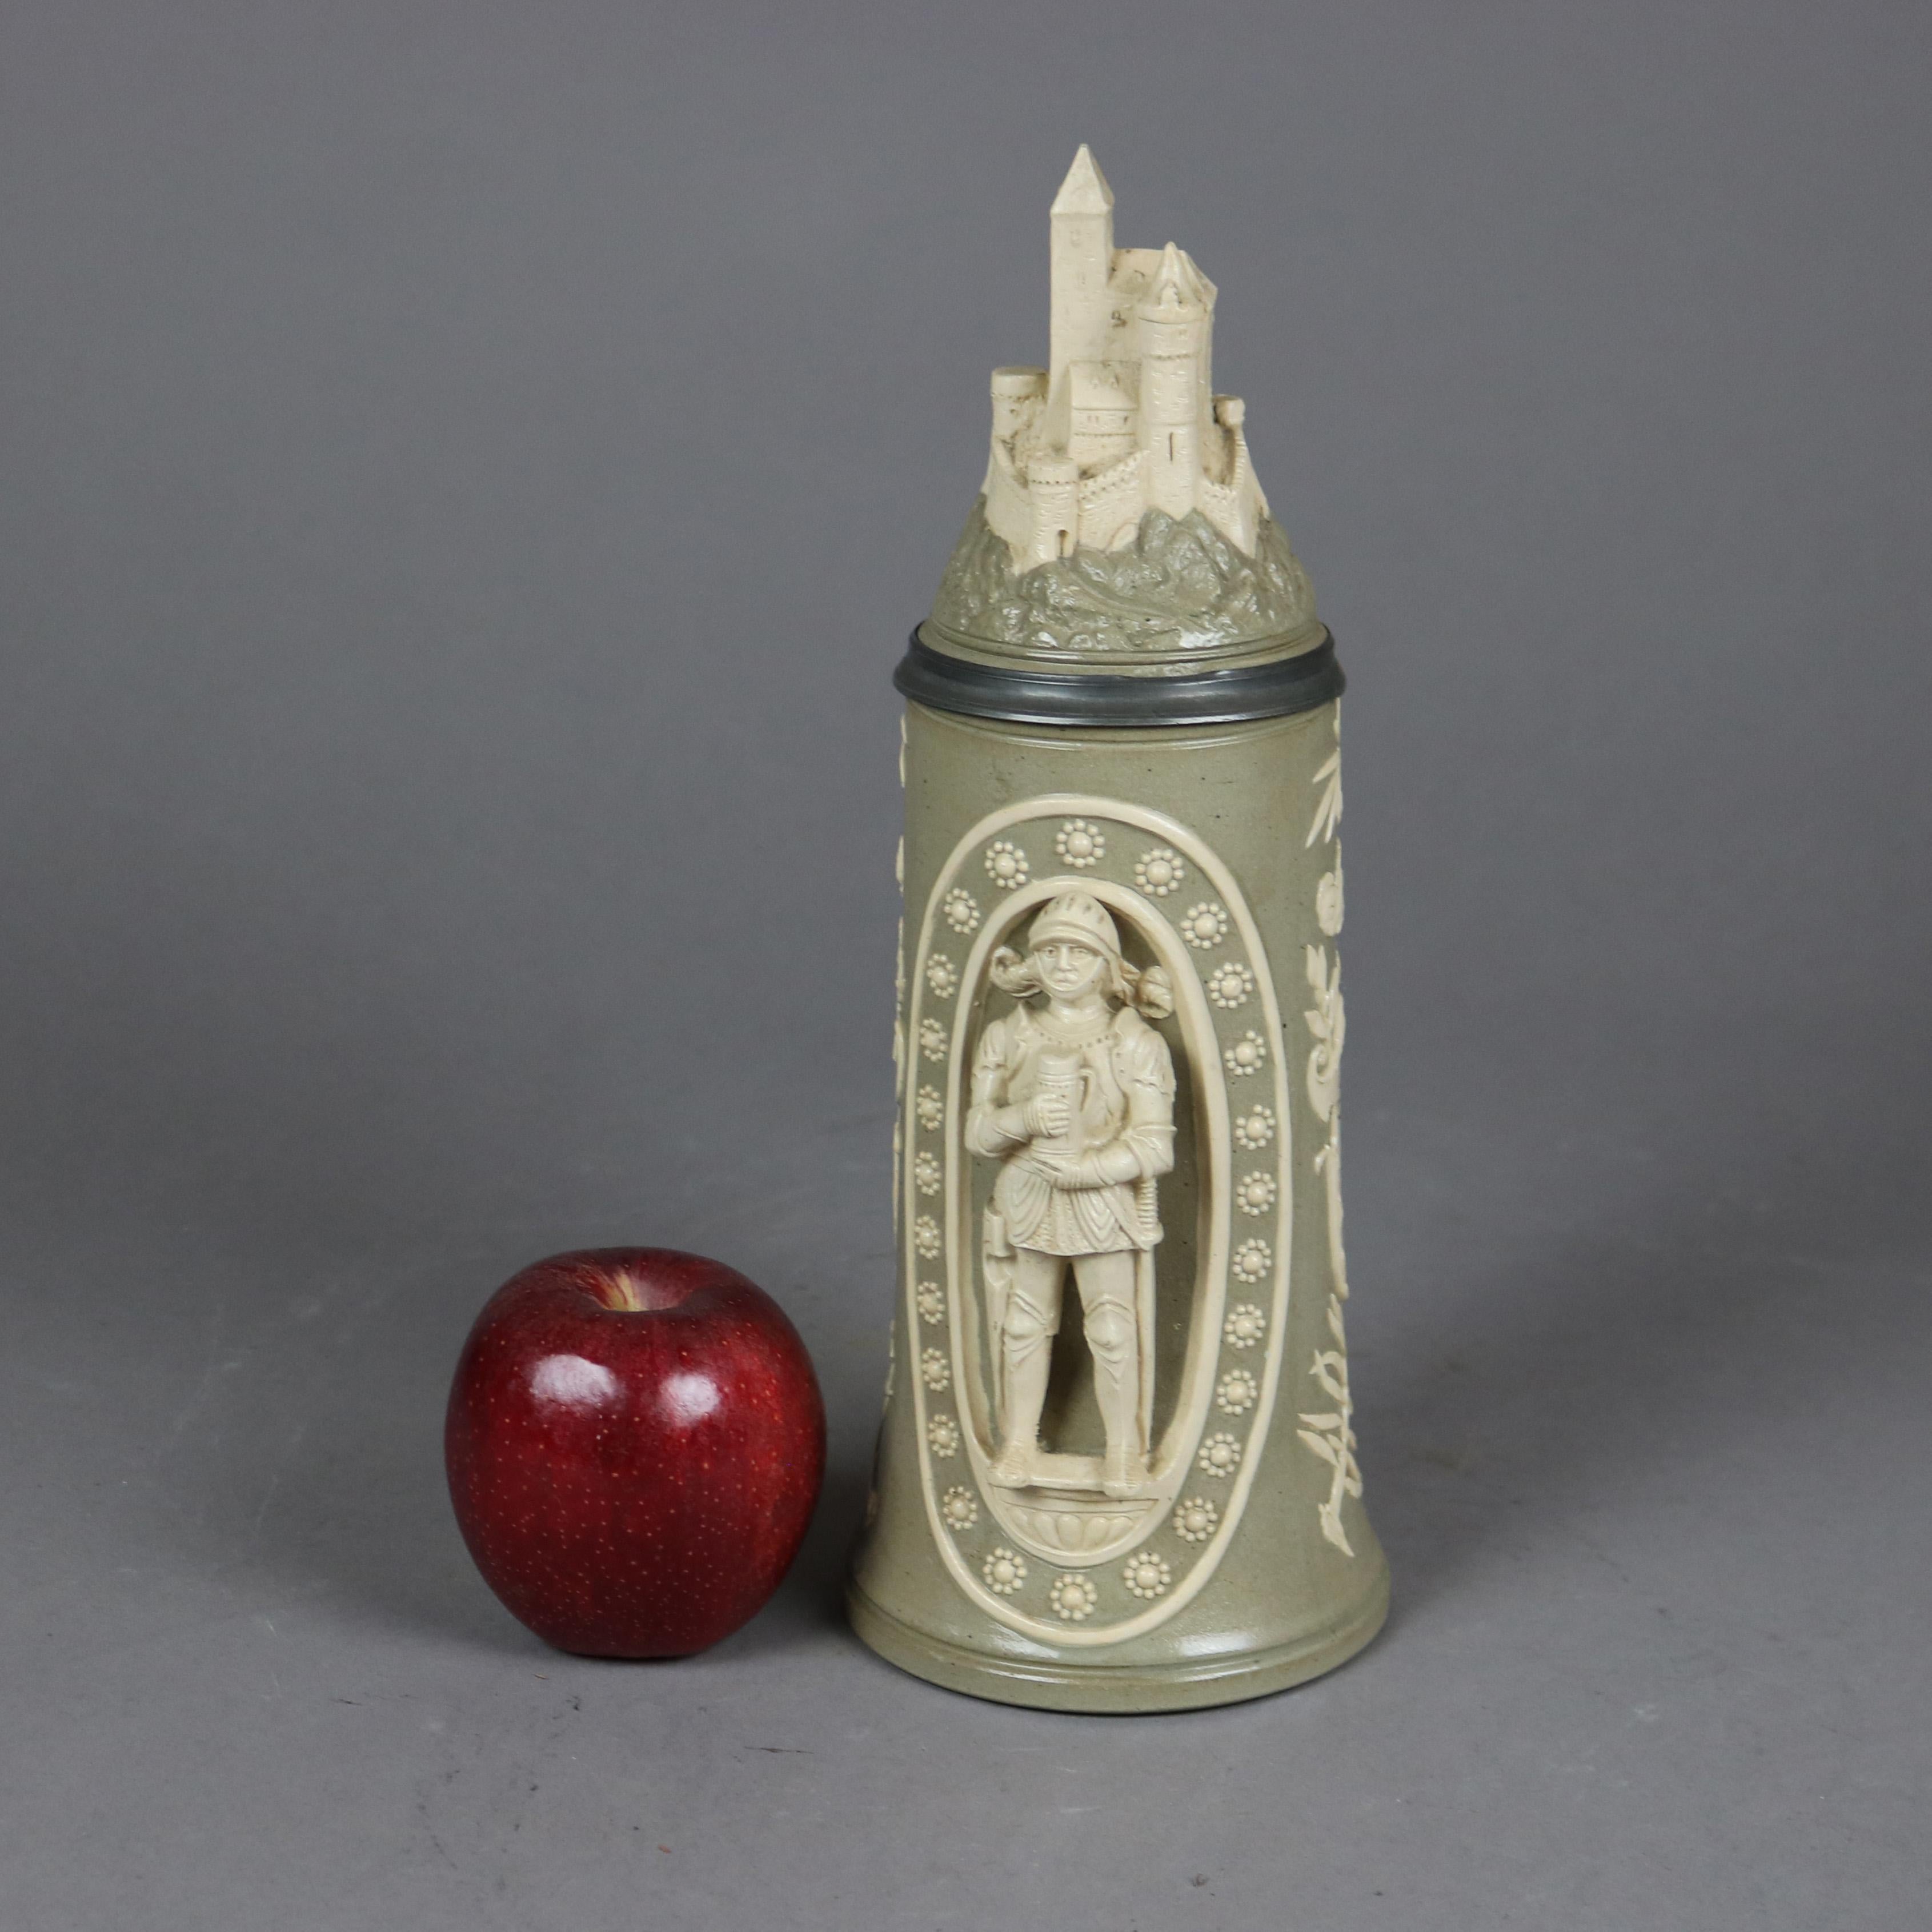 An antique and large German beer stein offers stoneware construction with reserves having knight figure, hinged pewter lid with castle finial and stamped as photographed, c1900

Measures- 11.25'' H x 4'' W x 5.75'' D.

Catalogue Note: Ask about